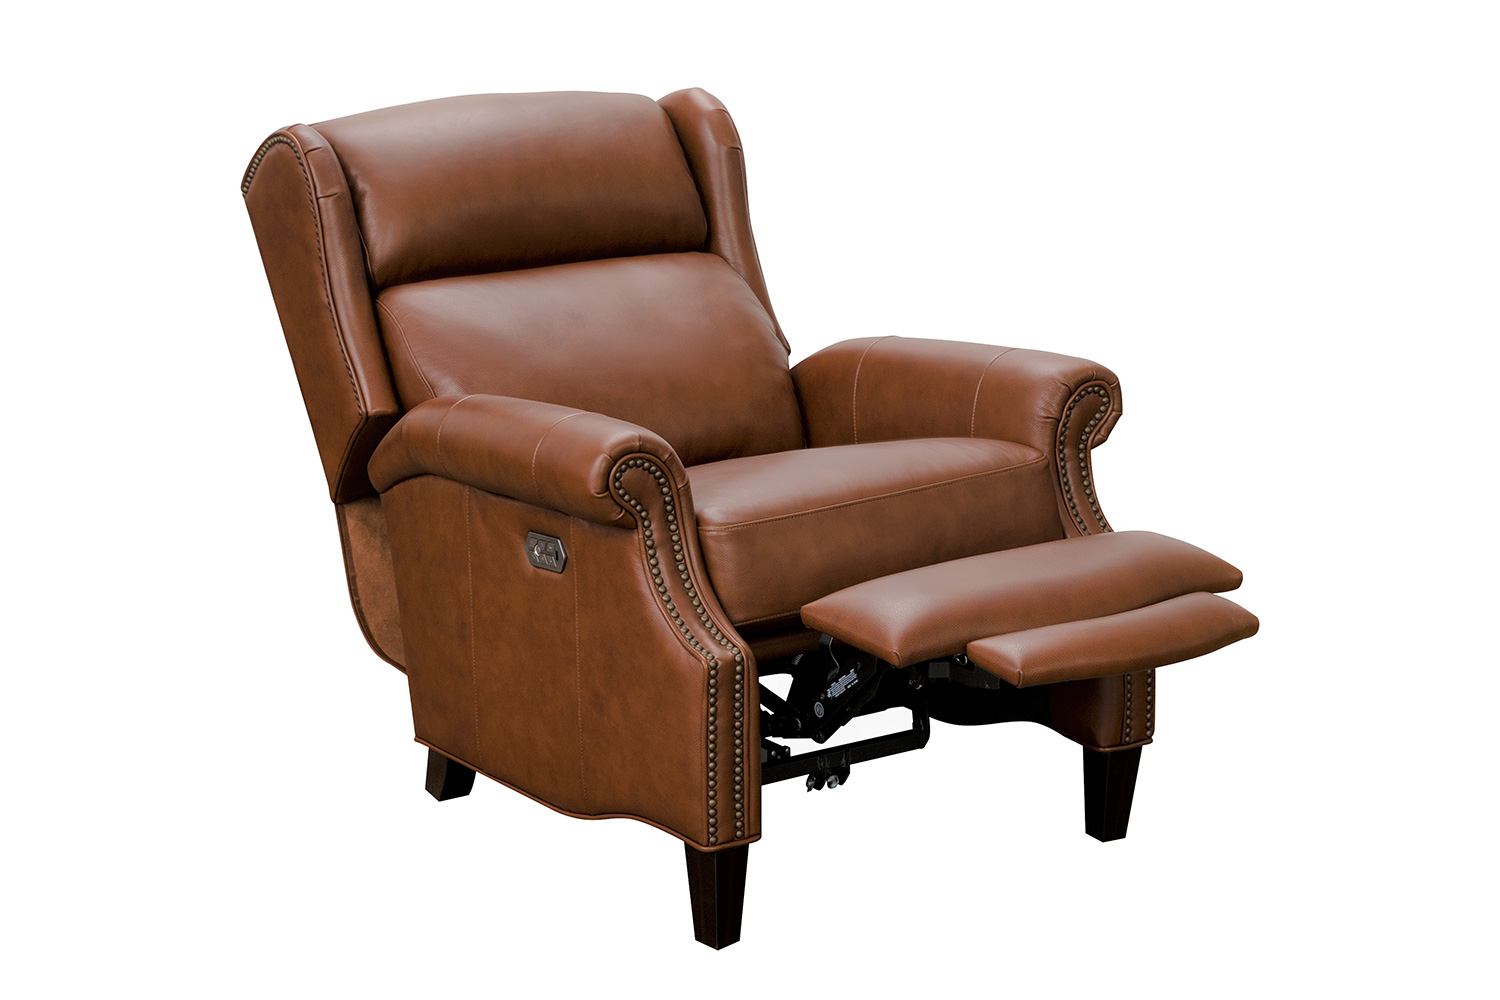 Barcalounger Philadelphia Power Recliner Chair with Power Head Rest and Lumbar - Ashford Bitters/All Leather